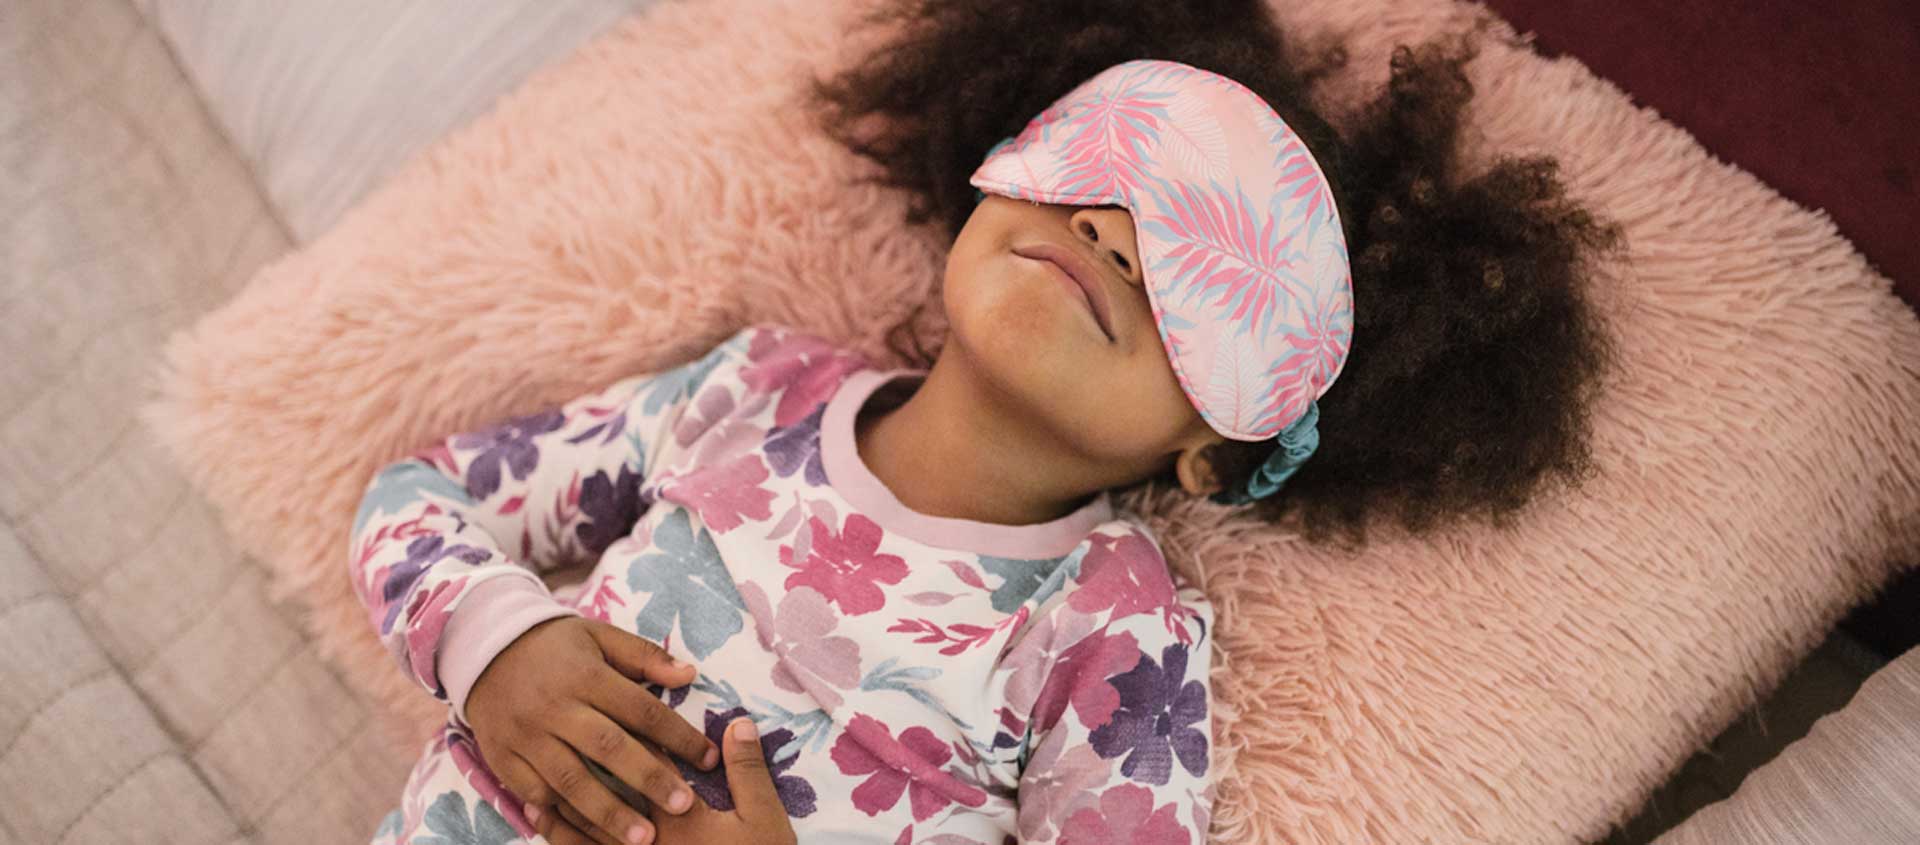 A Black American girl lays in bed with a sleep mask on.